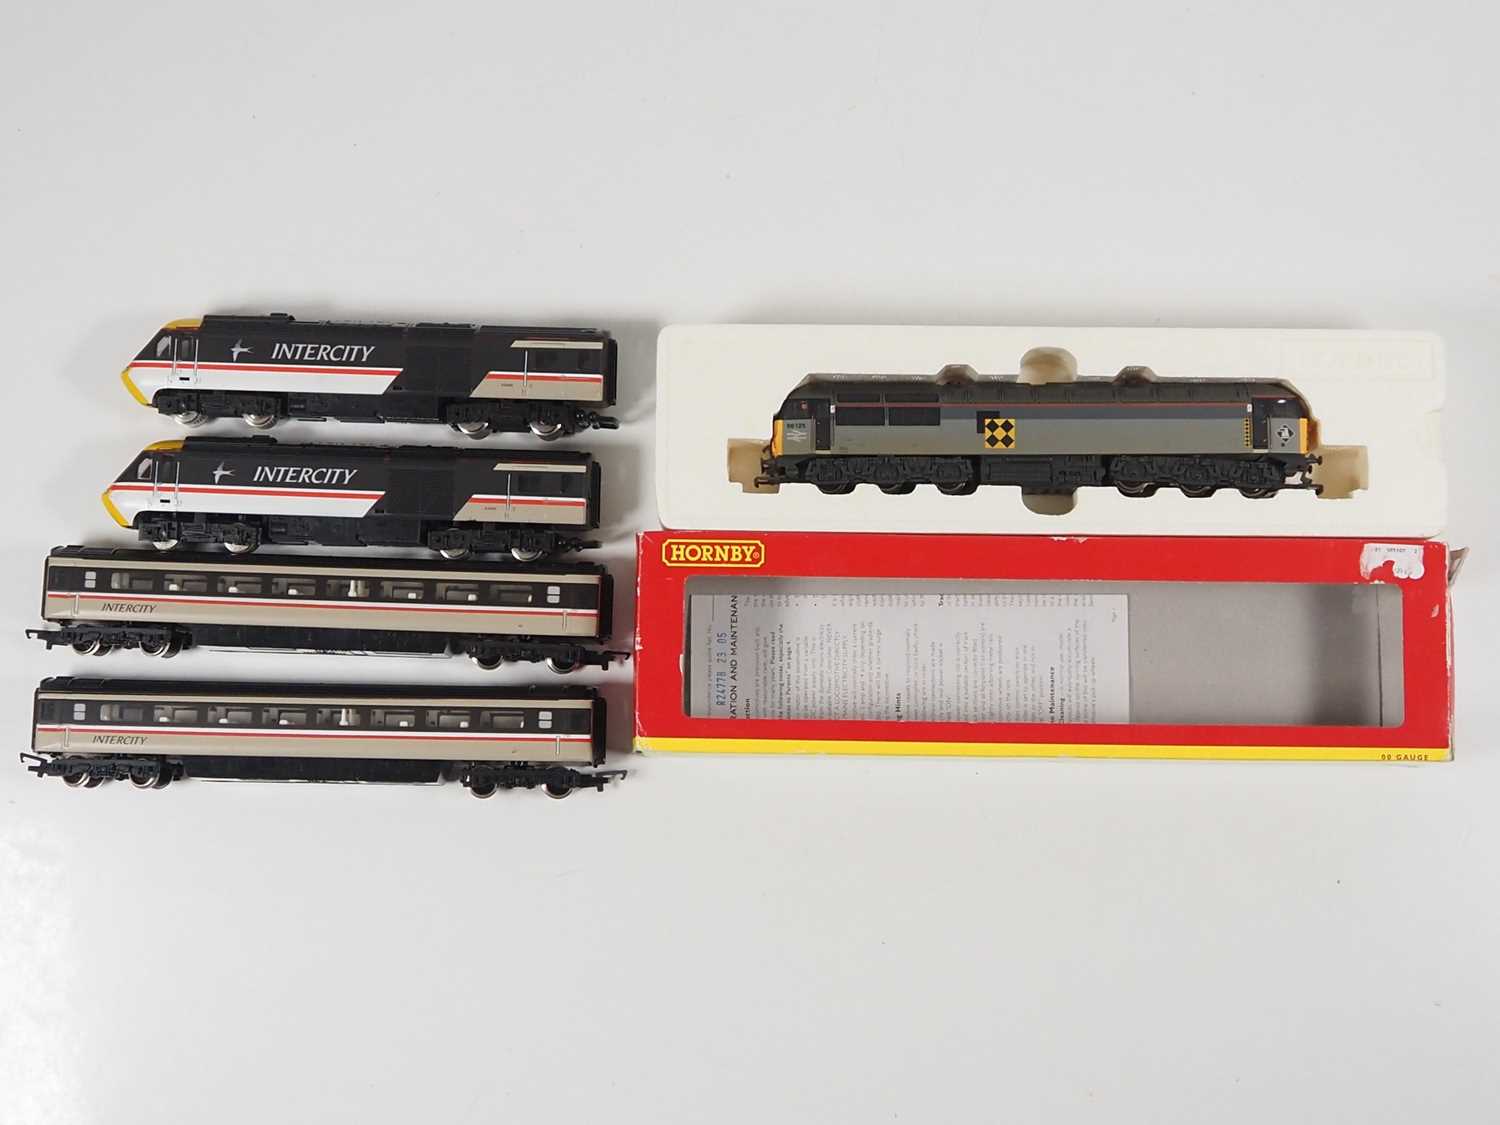 A HORNBY Class 56 diesel locomotive in Railfreight Coal Sector livery in original box together